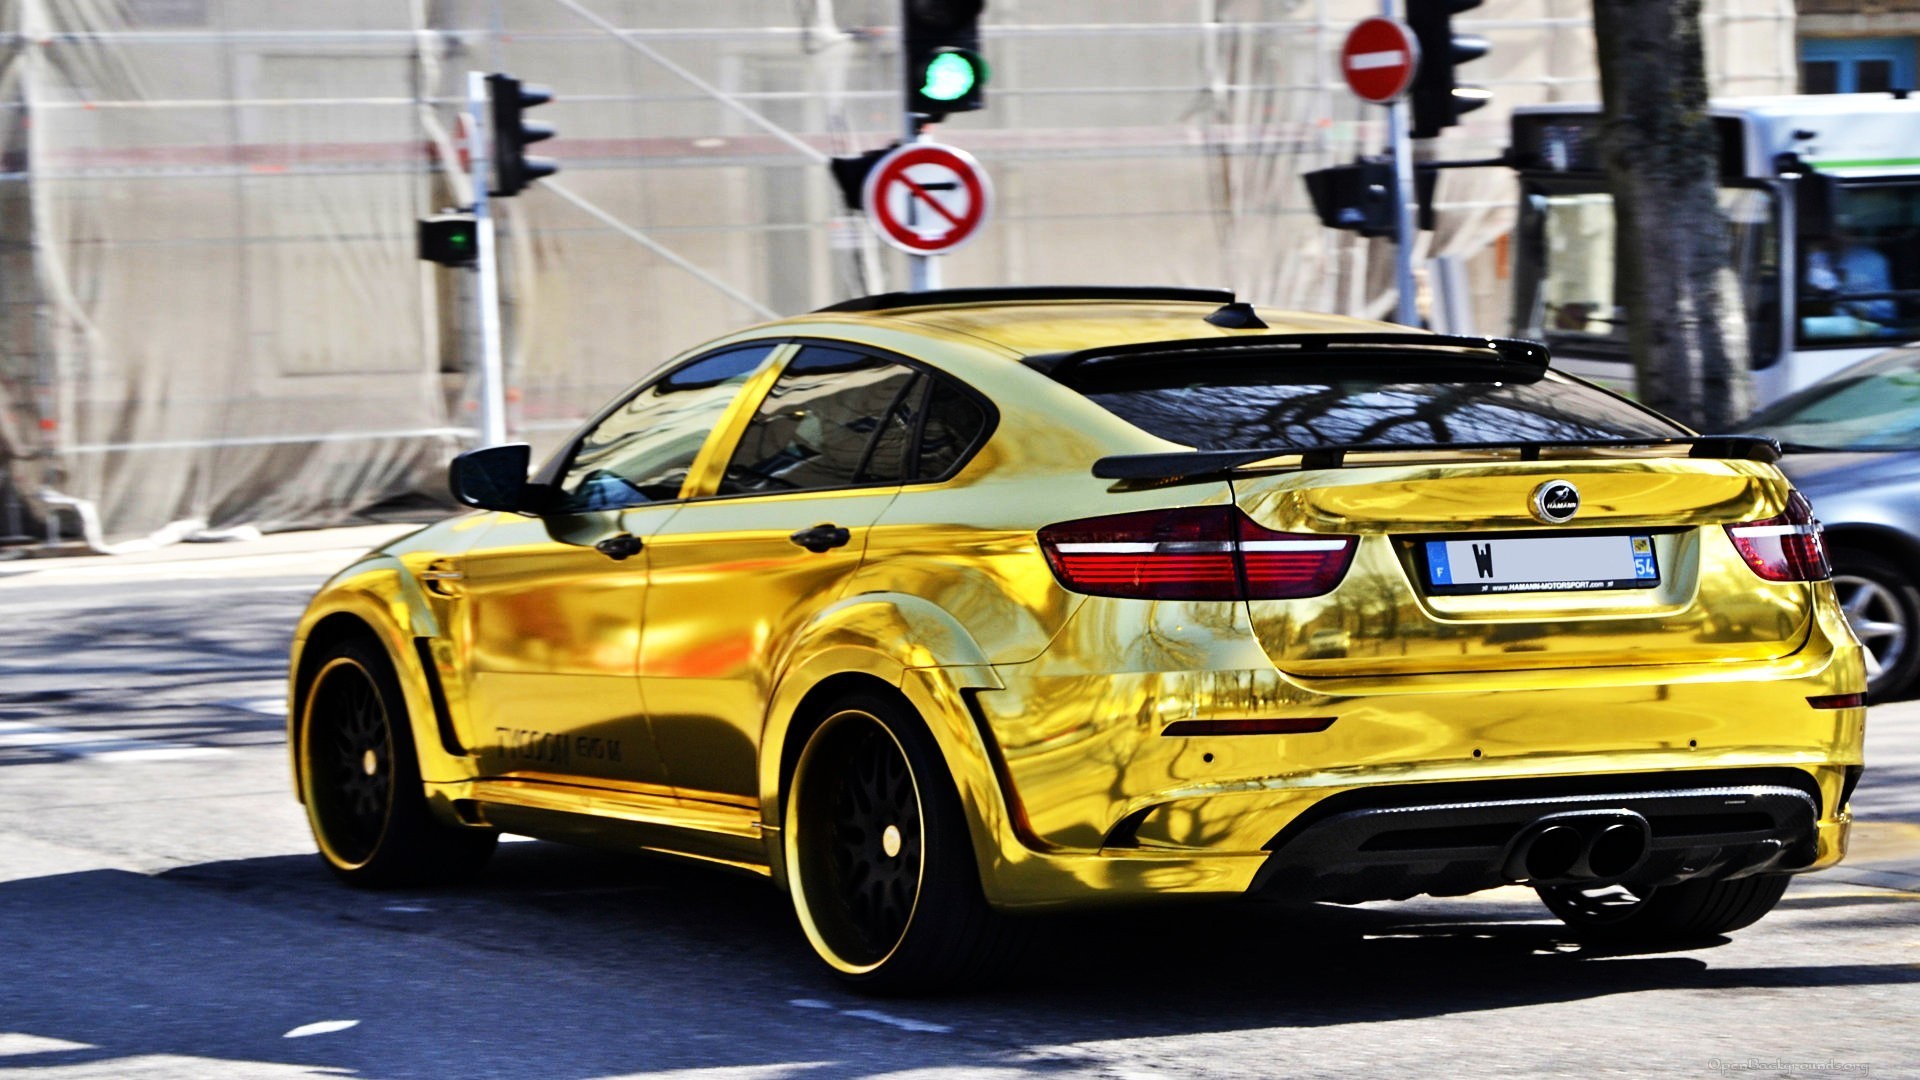 Bmw X6 Wallpaper High Resolution - Top 10 Suv In World , HD Wallpaper & Backgrounds